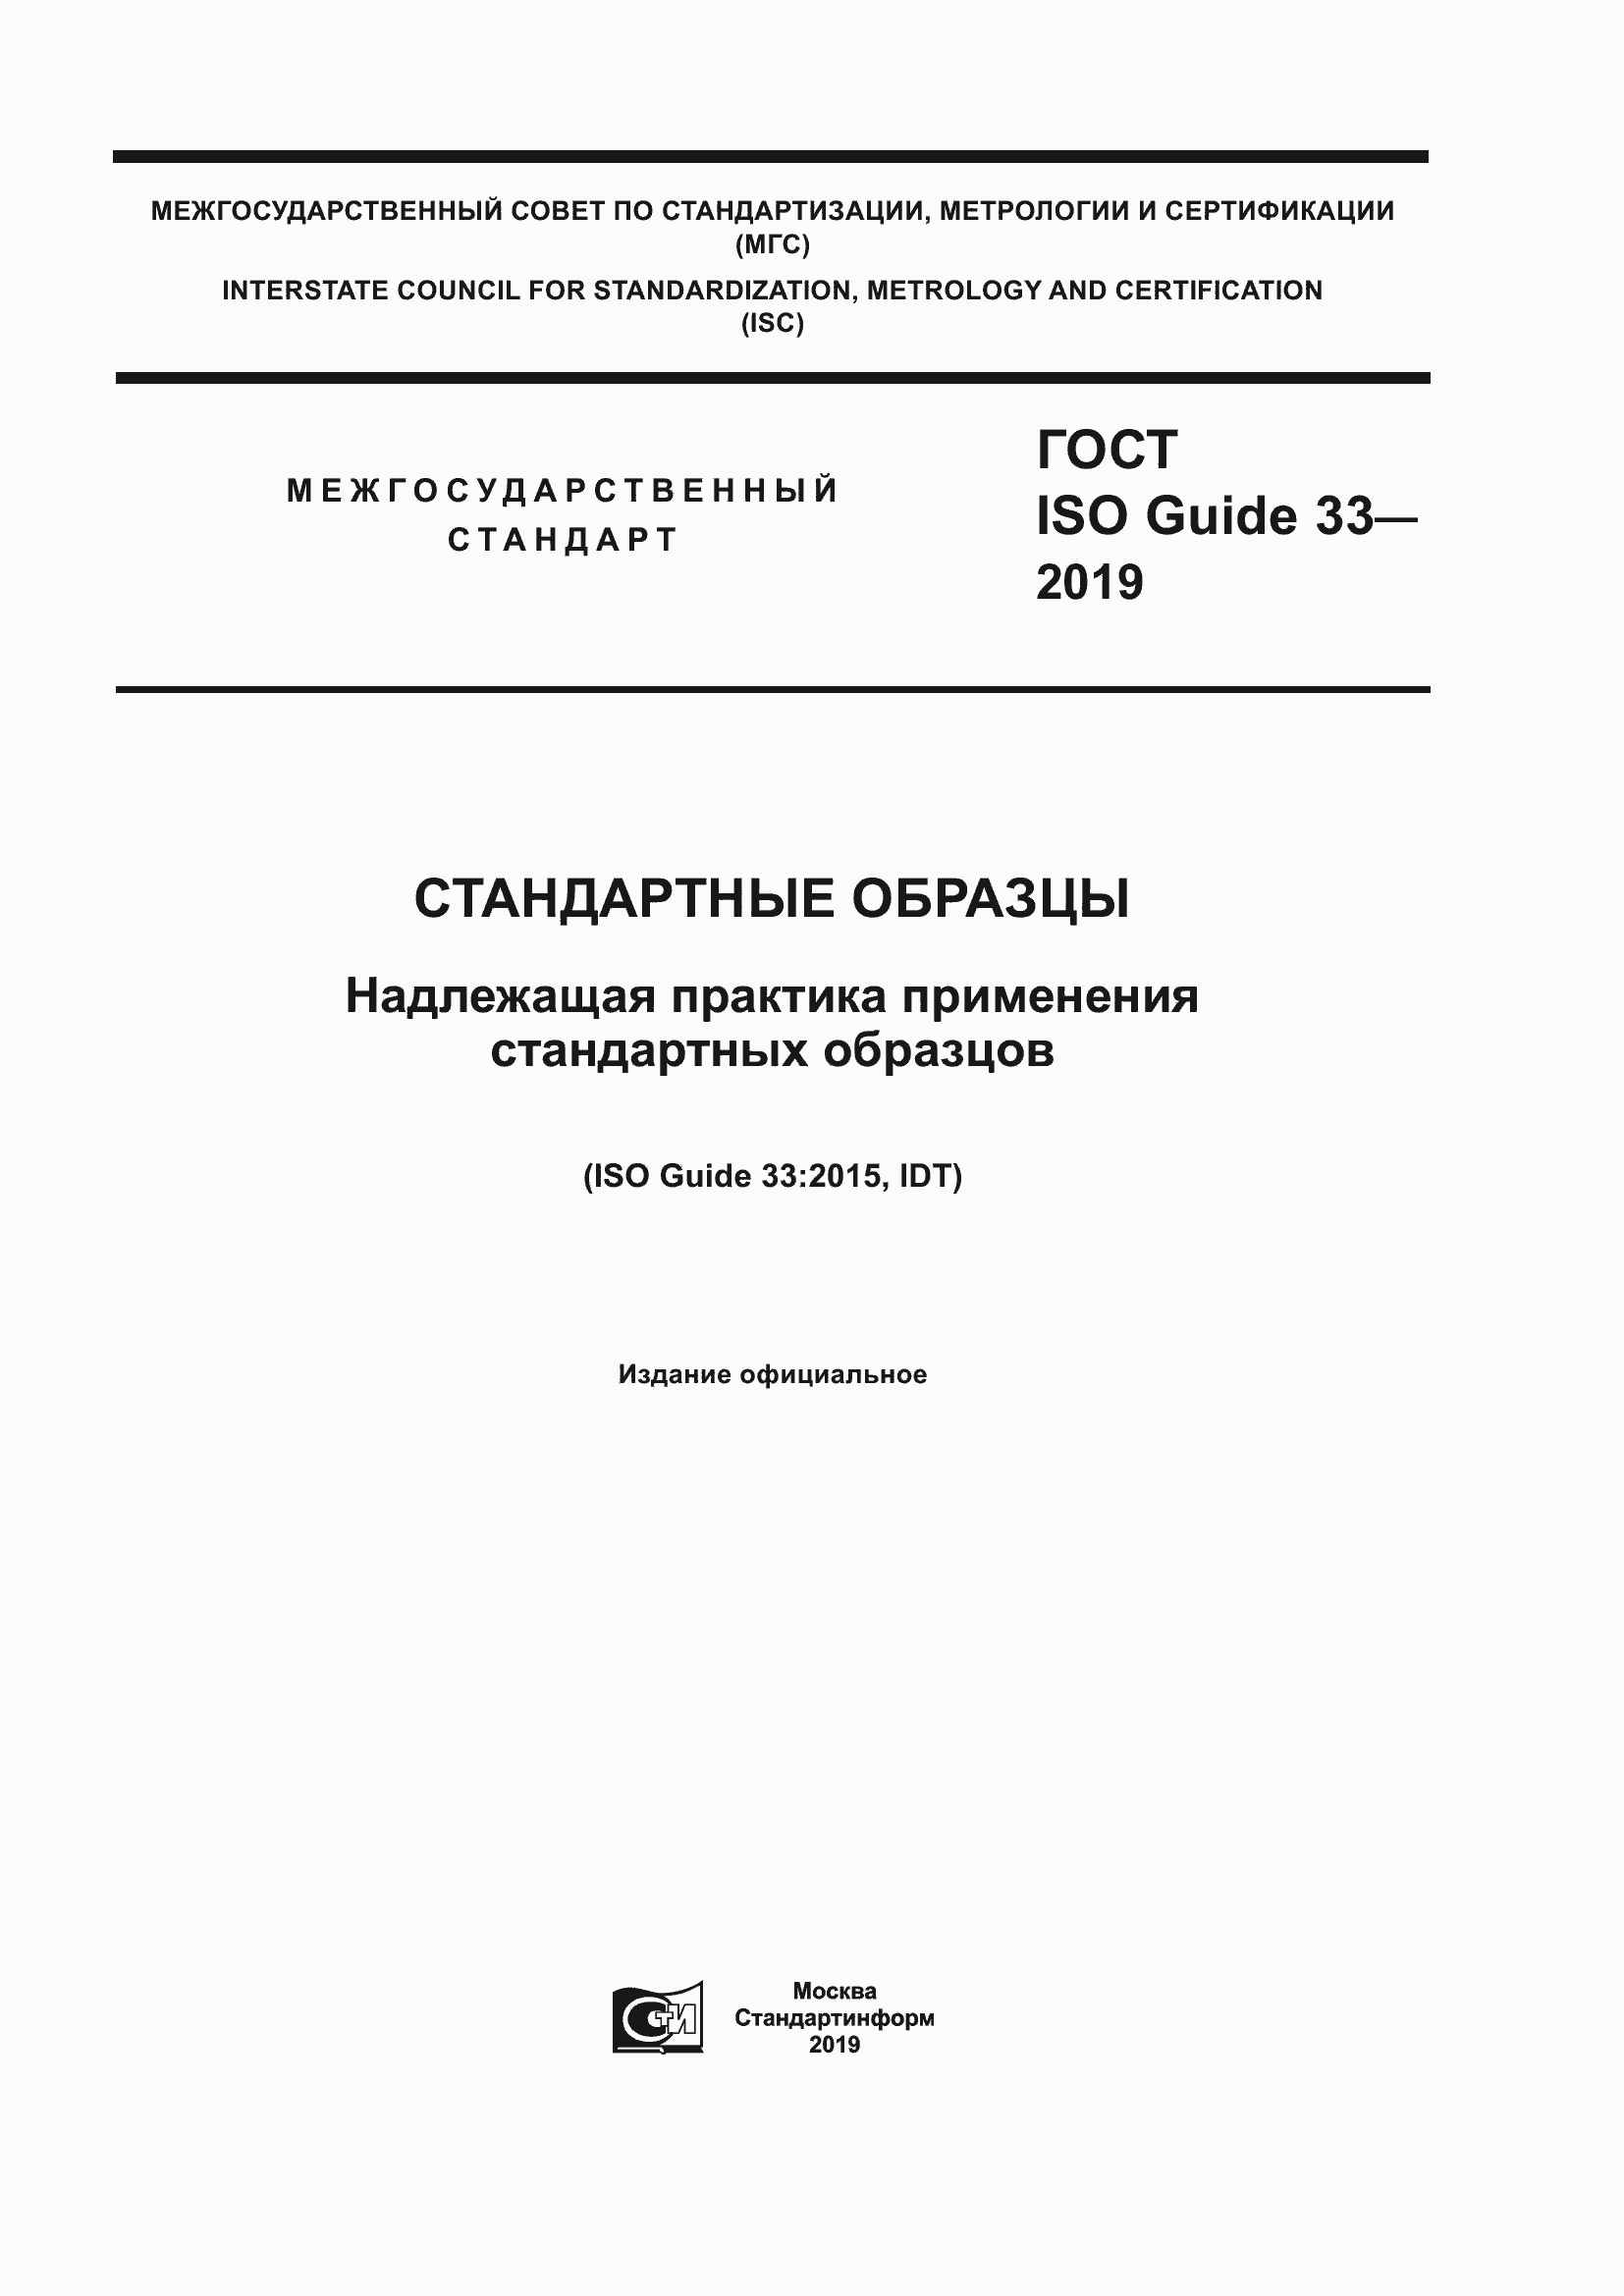  ISO Guide 33-2019.  1